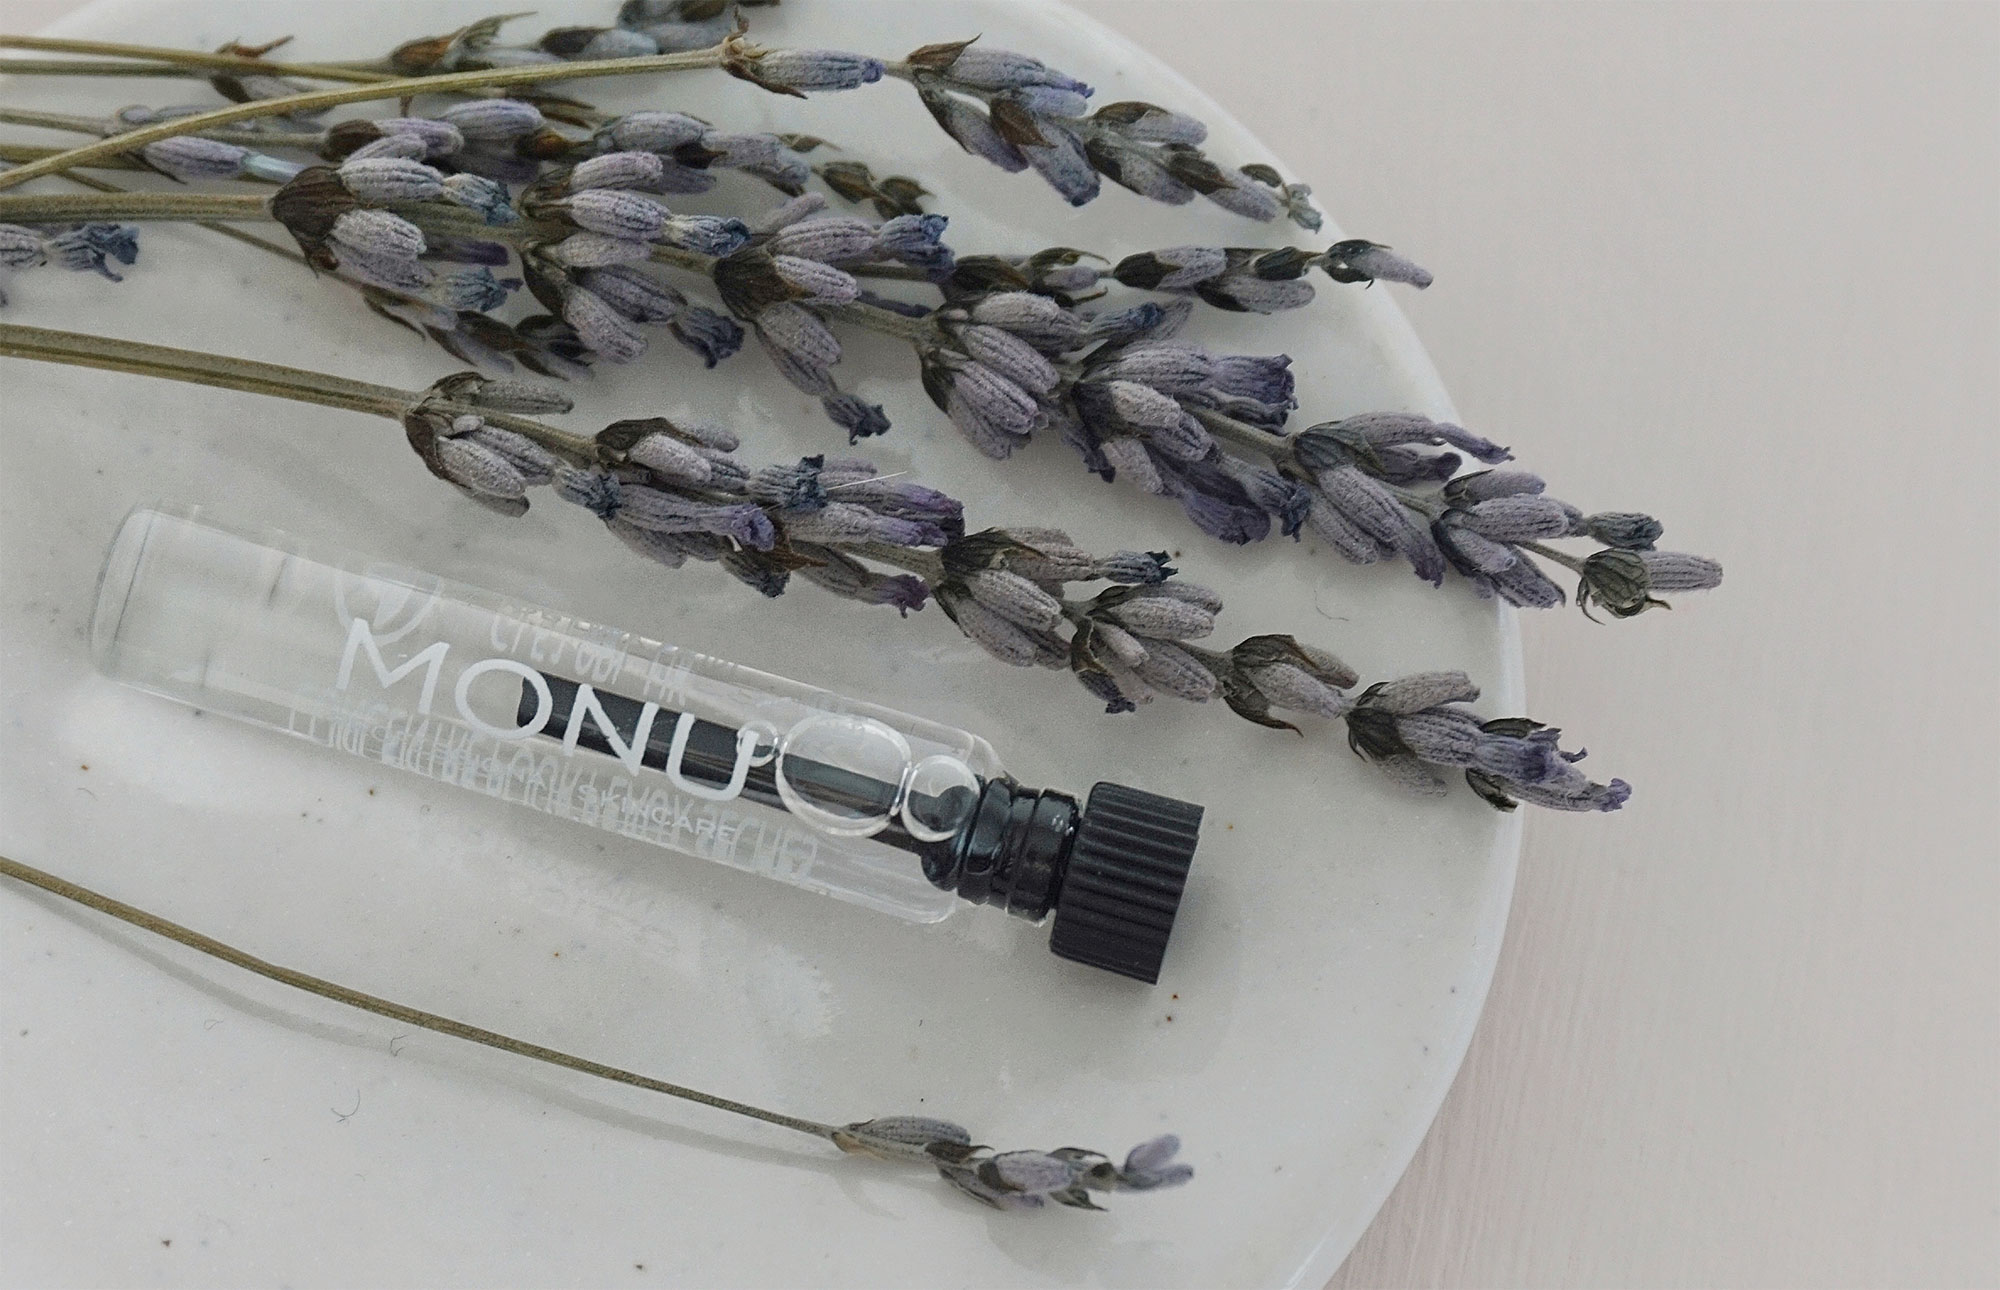 Monu with Lavender